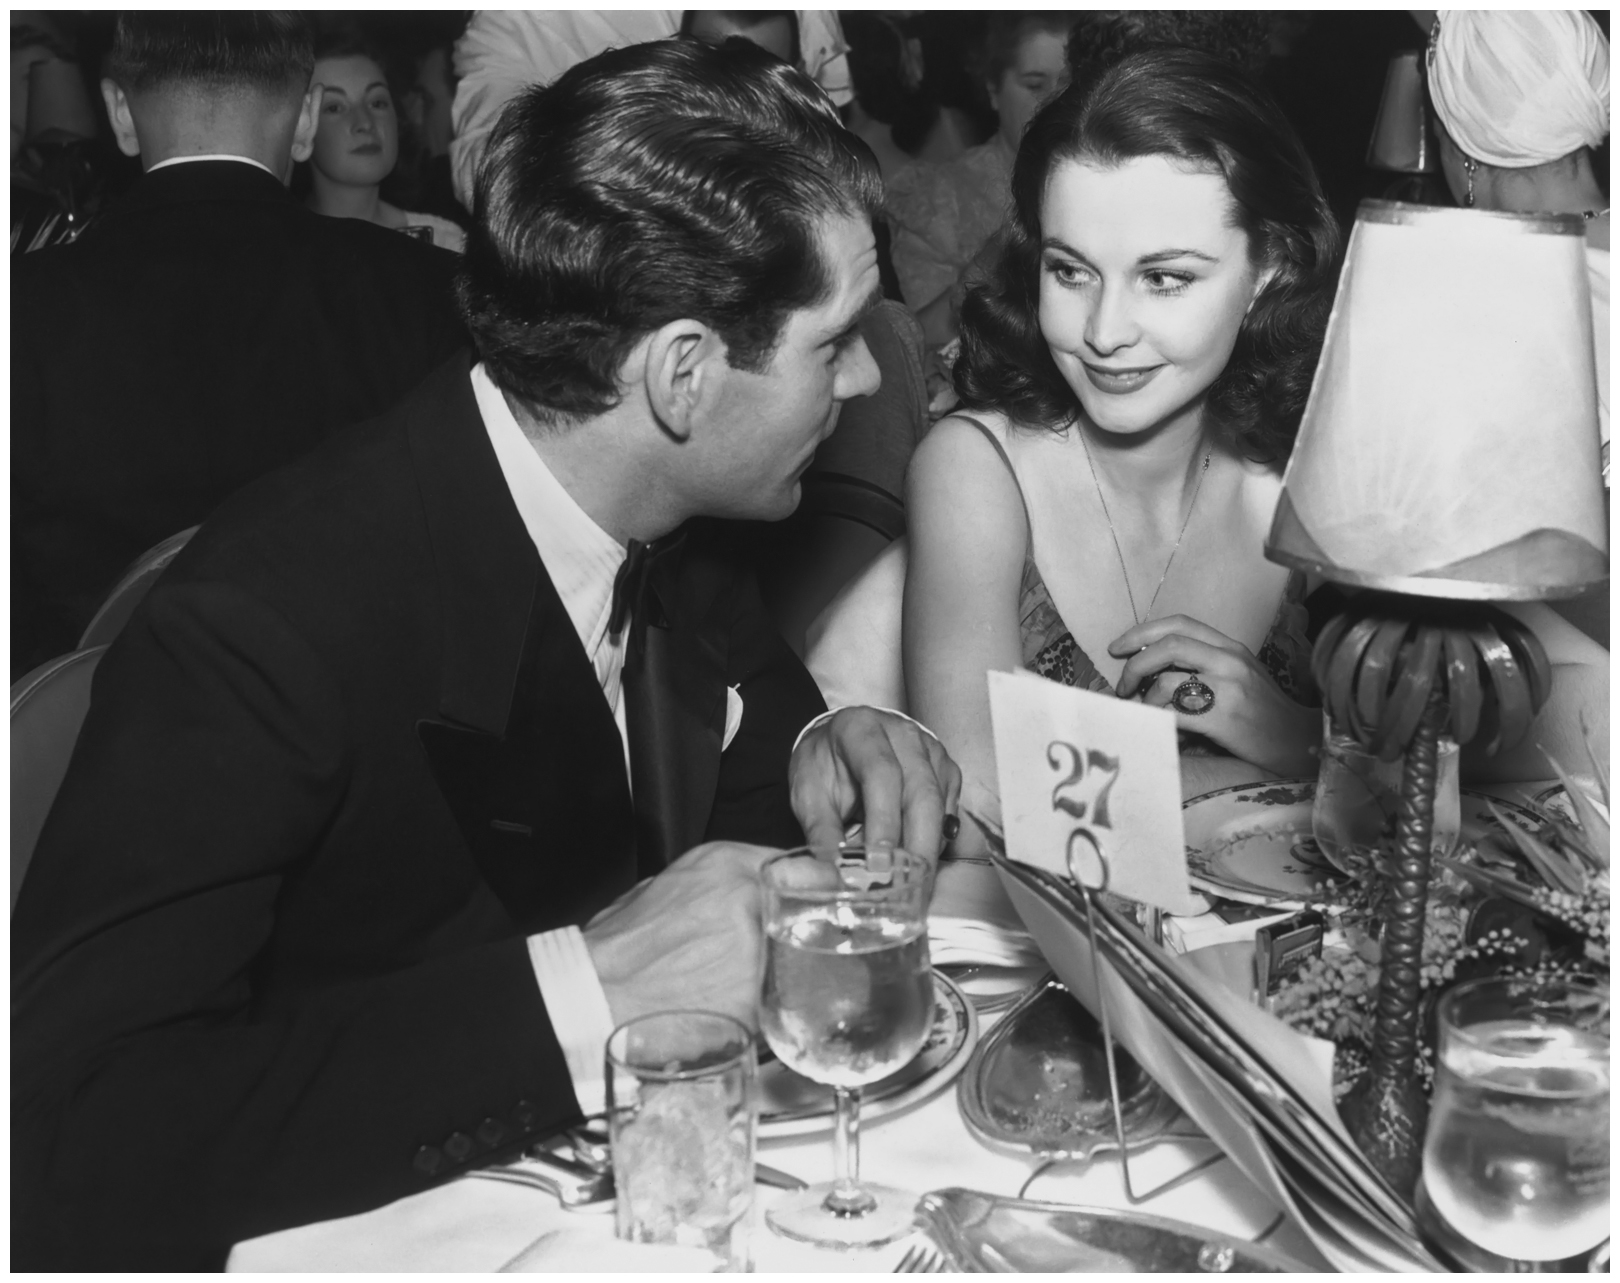 laurence-olivier-and-his-wife-vivien-leigh-at-a-dinner-table-in-the-1940s.jpg